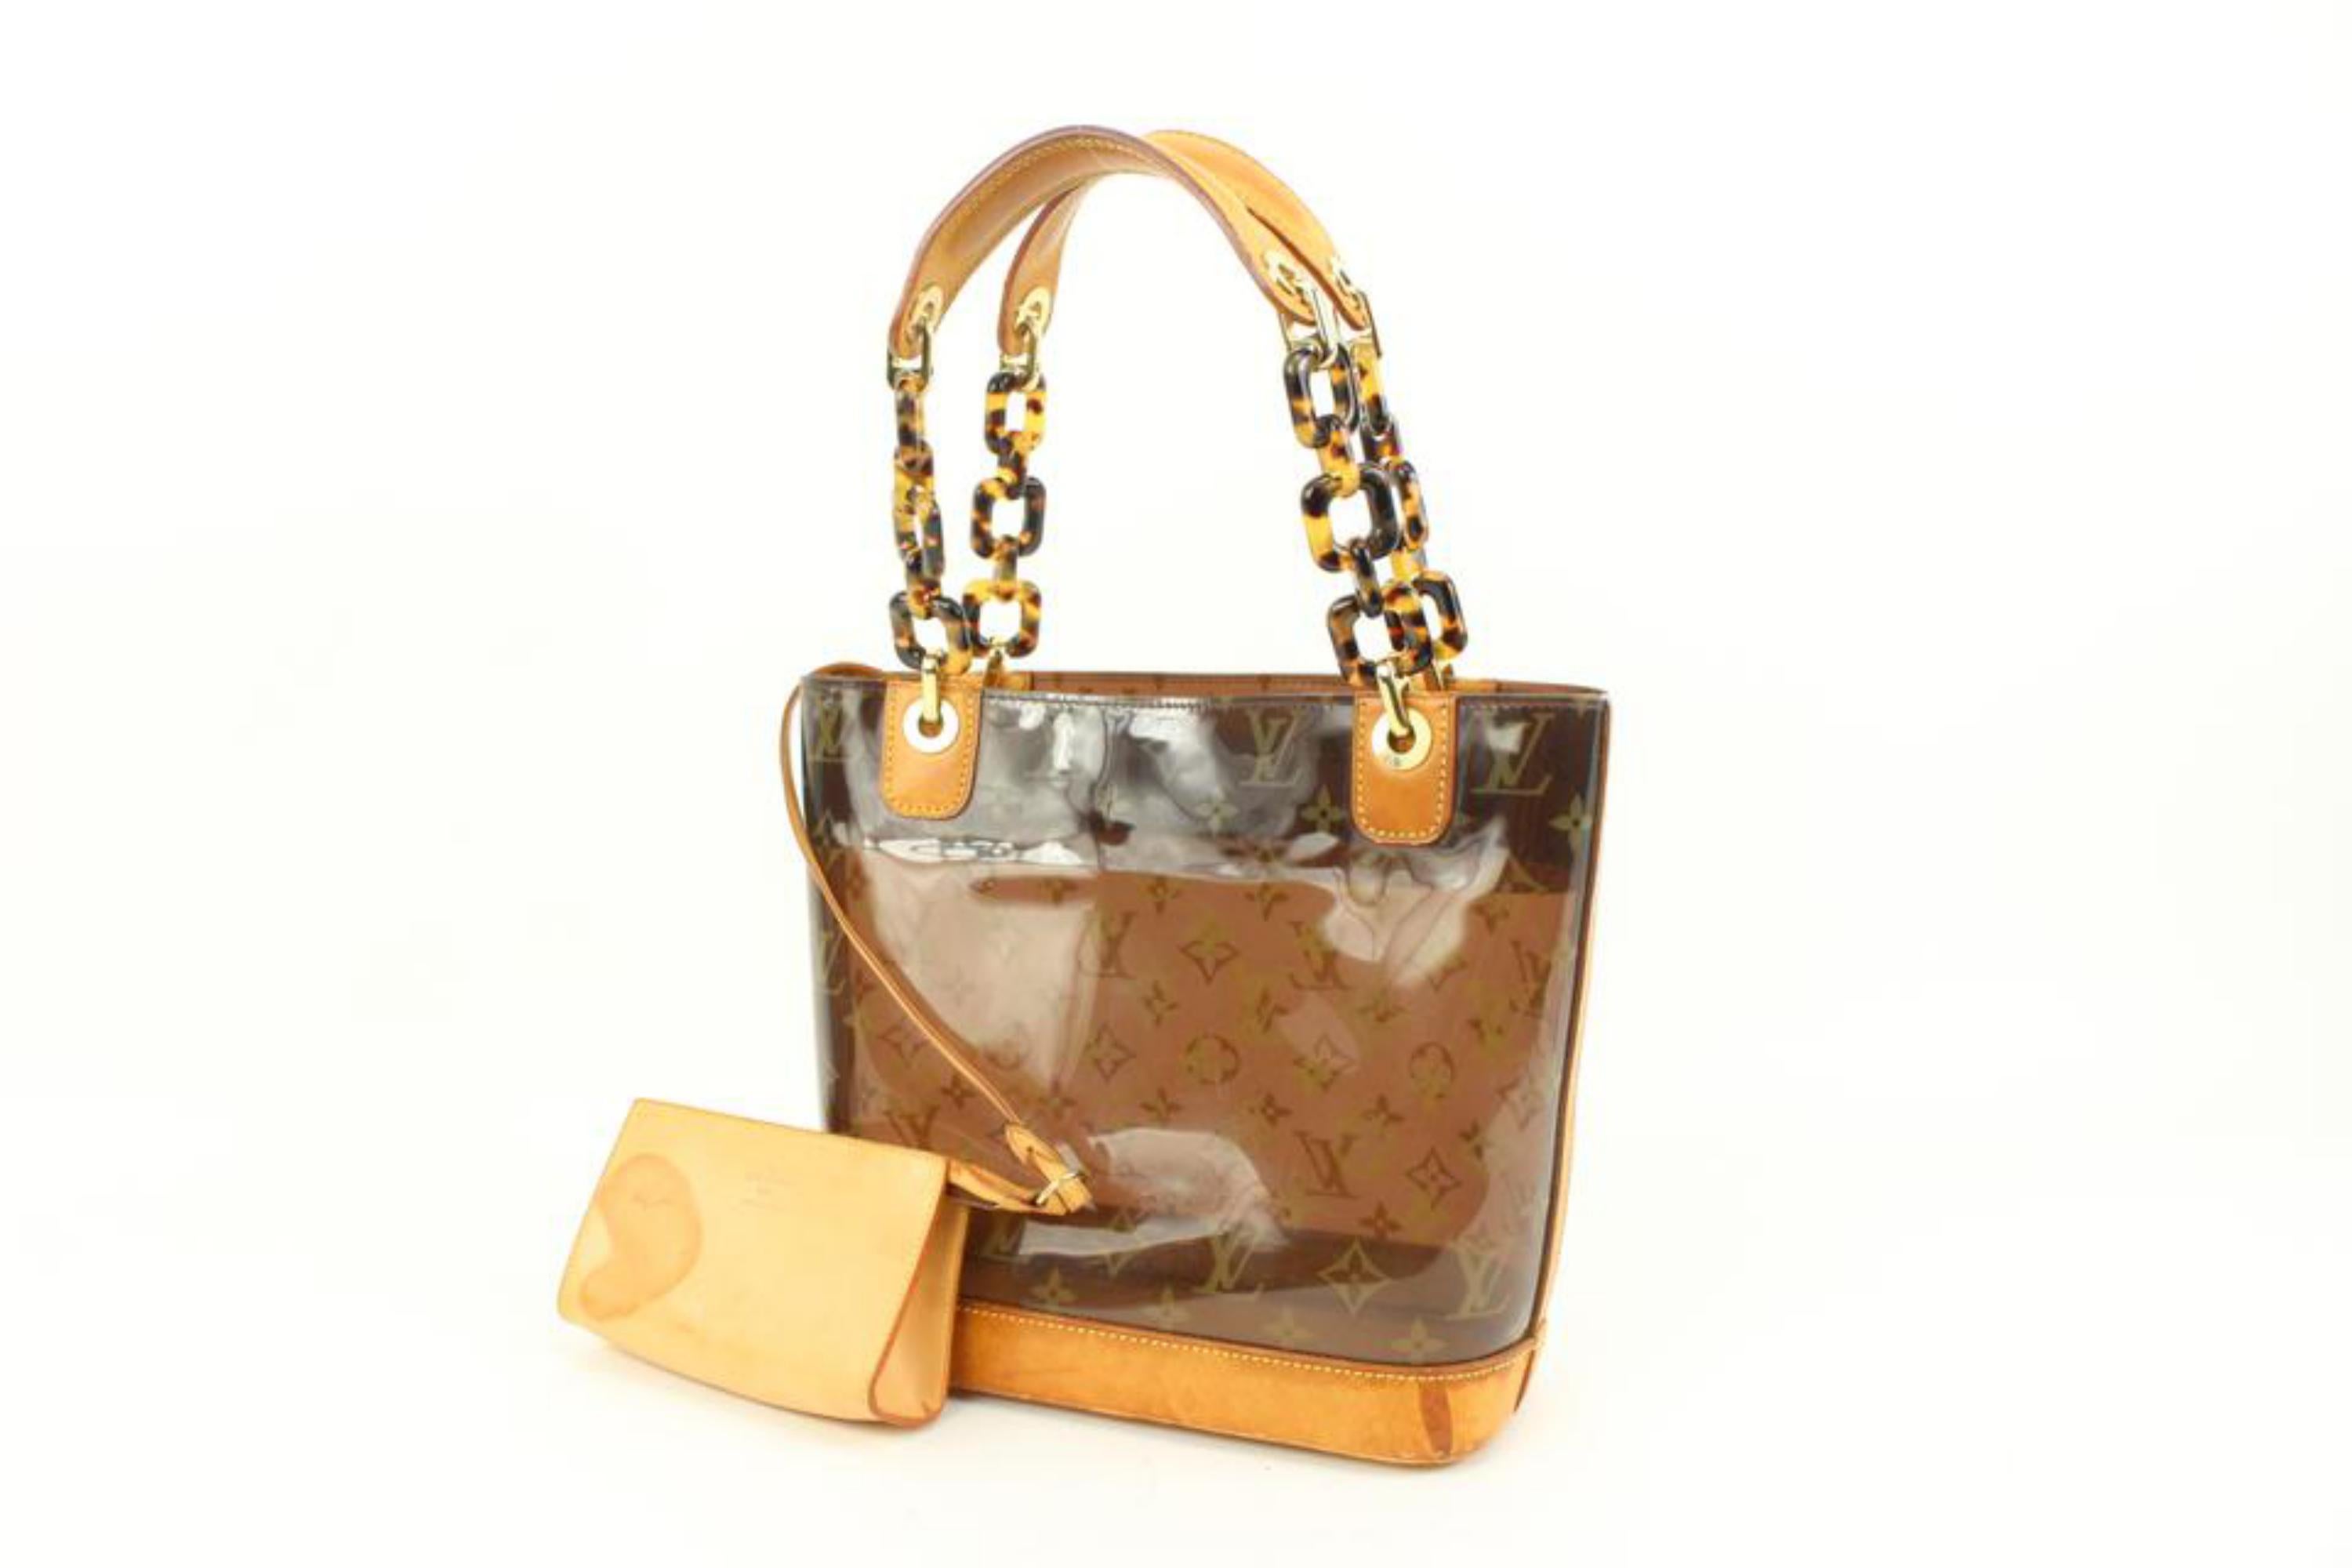 Louis Vuitton Limited Clear Monogram Cabas Sac Ambre PM Tote with Pouch 97lk425s
Date Code/Serial Number: LM0023
Made In: Spain
Measurements: Length:  11